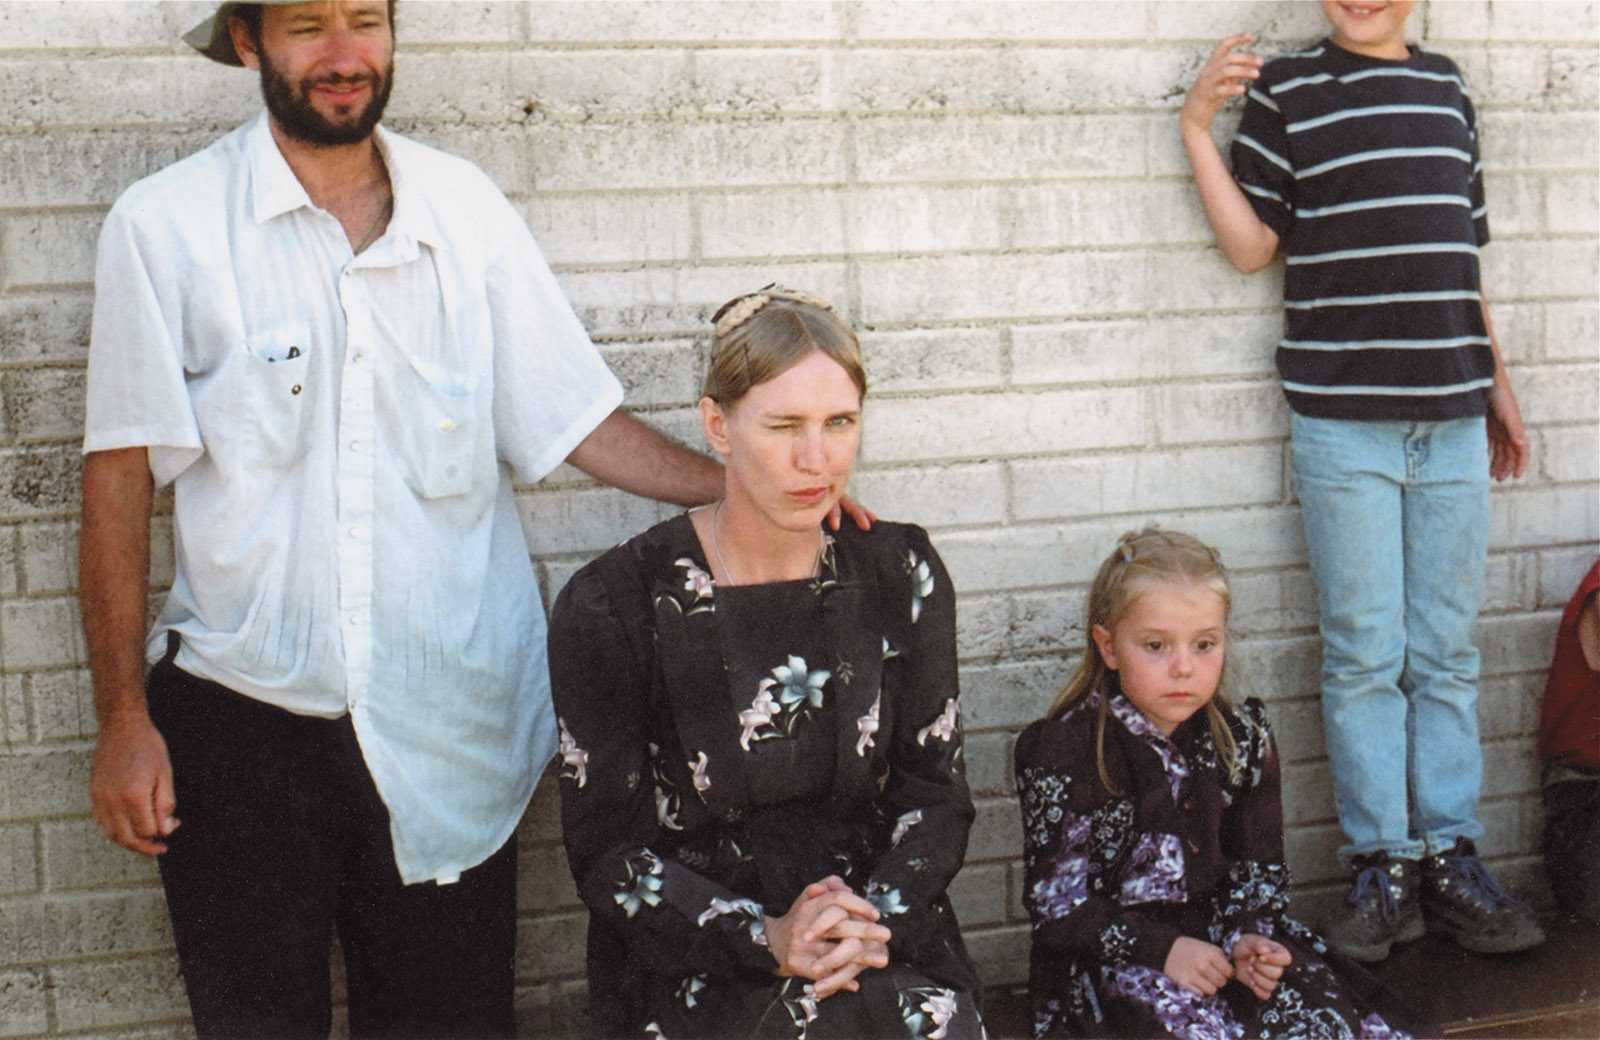 Miriam Toews in costume as the character Esther during the filming of Silent Light, directed by Carlos Reygadas (left) and set in a Mennonite settlement in Chihuahua, Mexico, July 2006